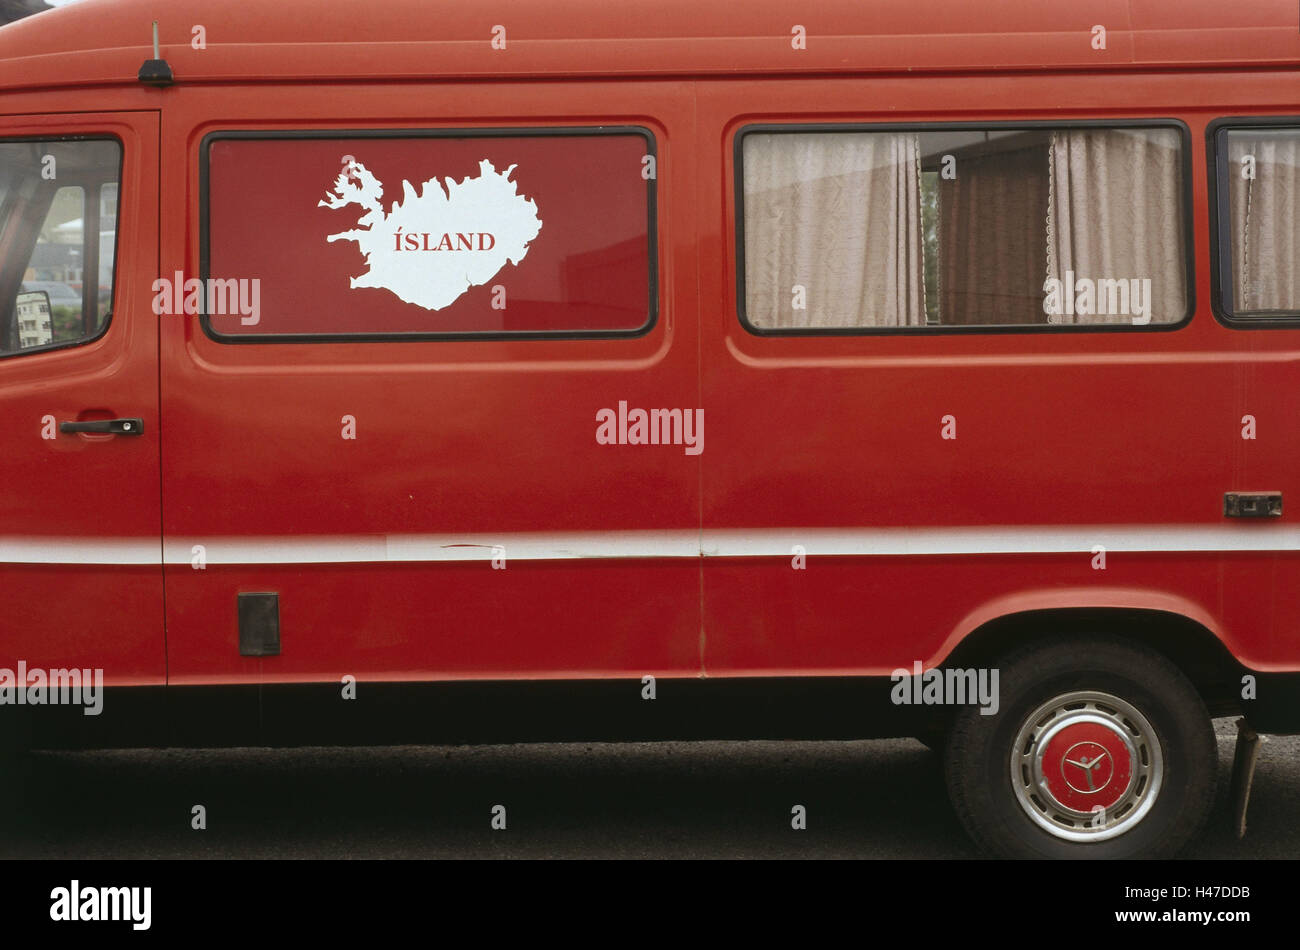 Camper, red, car window, contours, Island, preview, Europe, Northern Europe, Island, island, old-timer, vehicle, means of transportation, car, camping vehicle, camper, minibus, Mercedes, 207-D, nostalgically, page window, window, silhouette, nobody, outsi Stock Photo